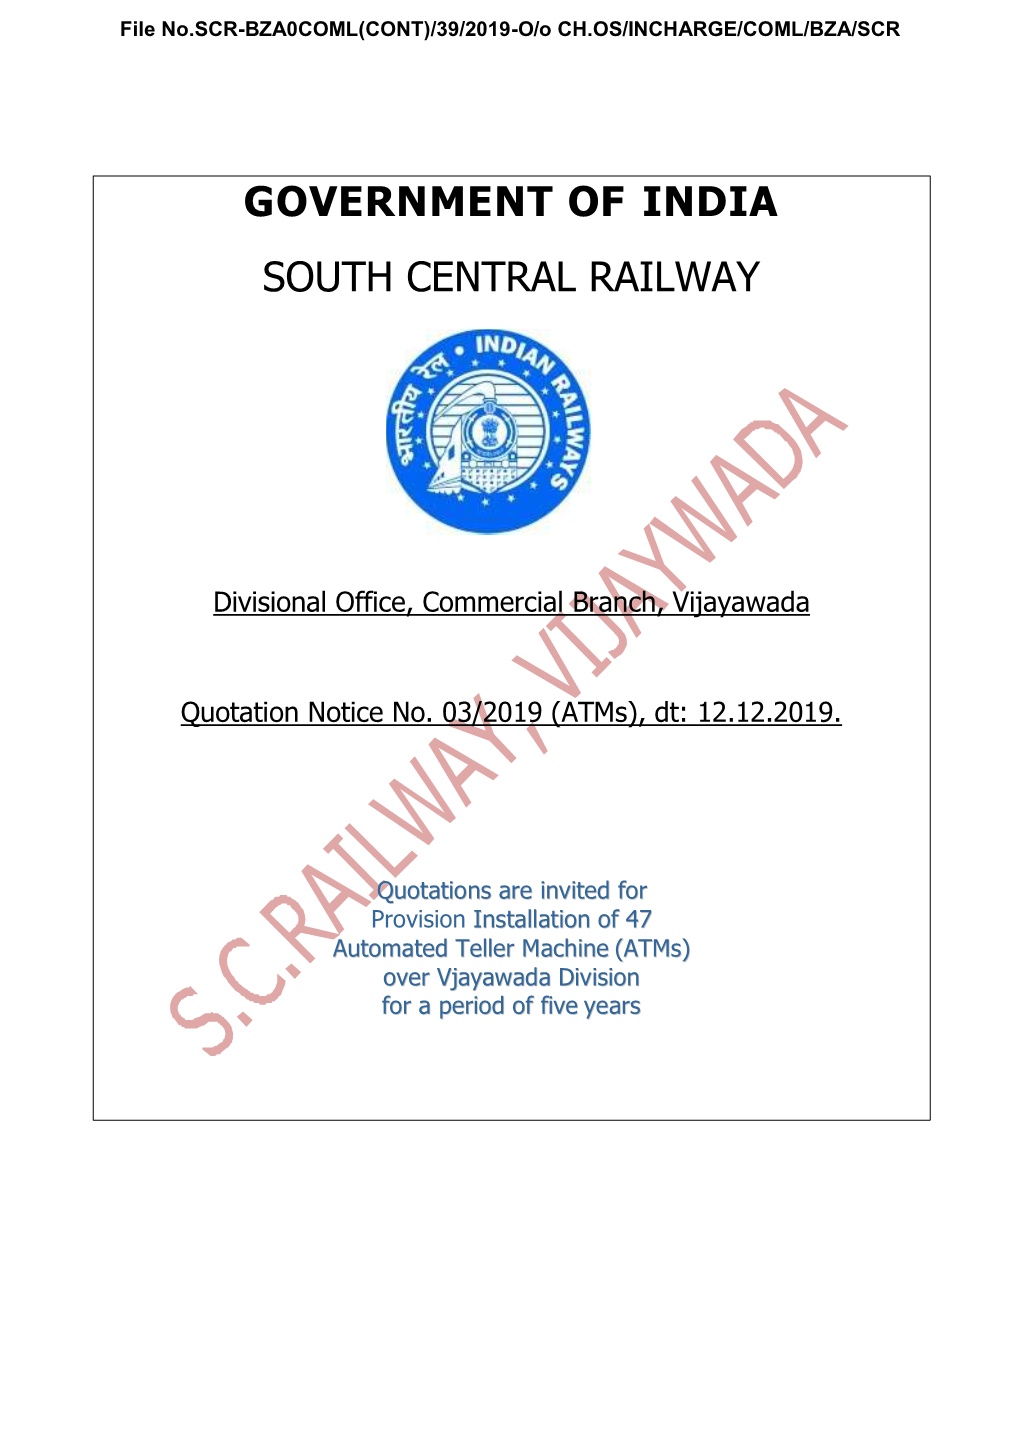 Government of India South Central Railway